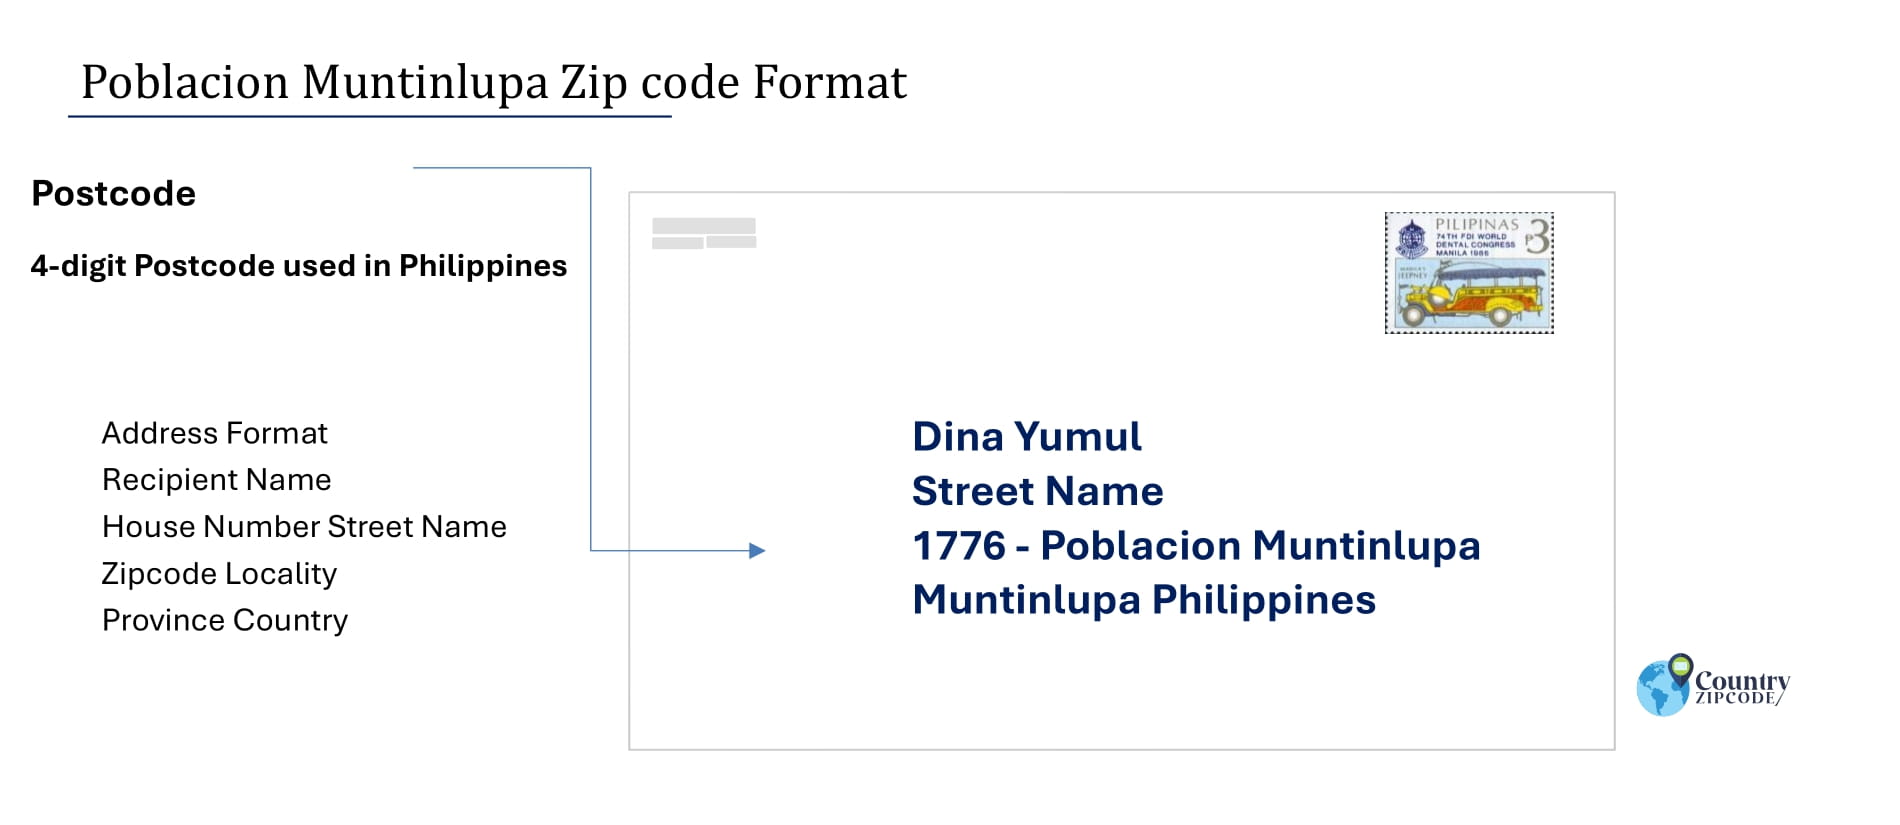 example of Poblacion Muntinlupa Philippines zip code and address format